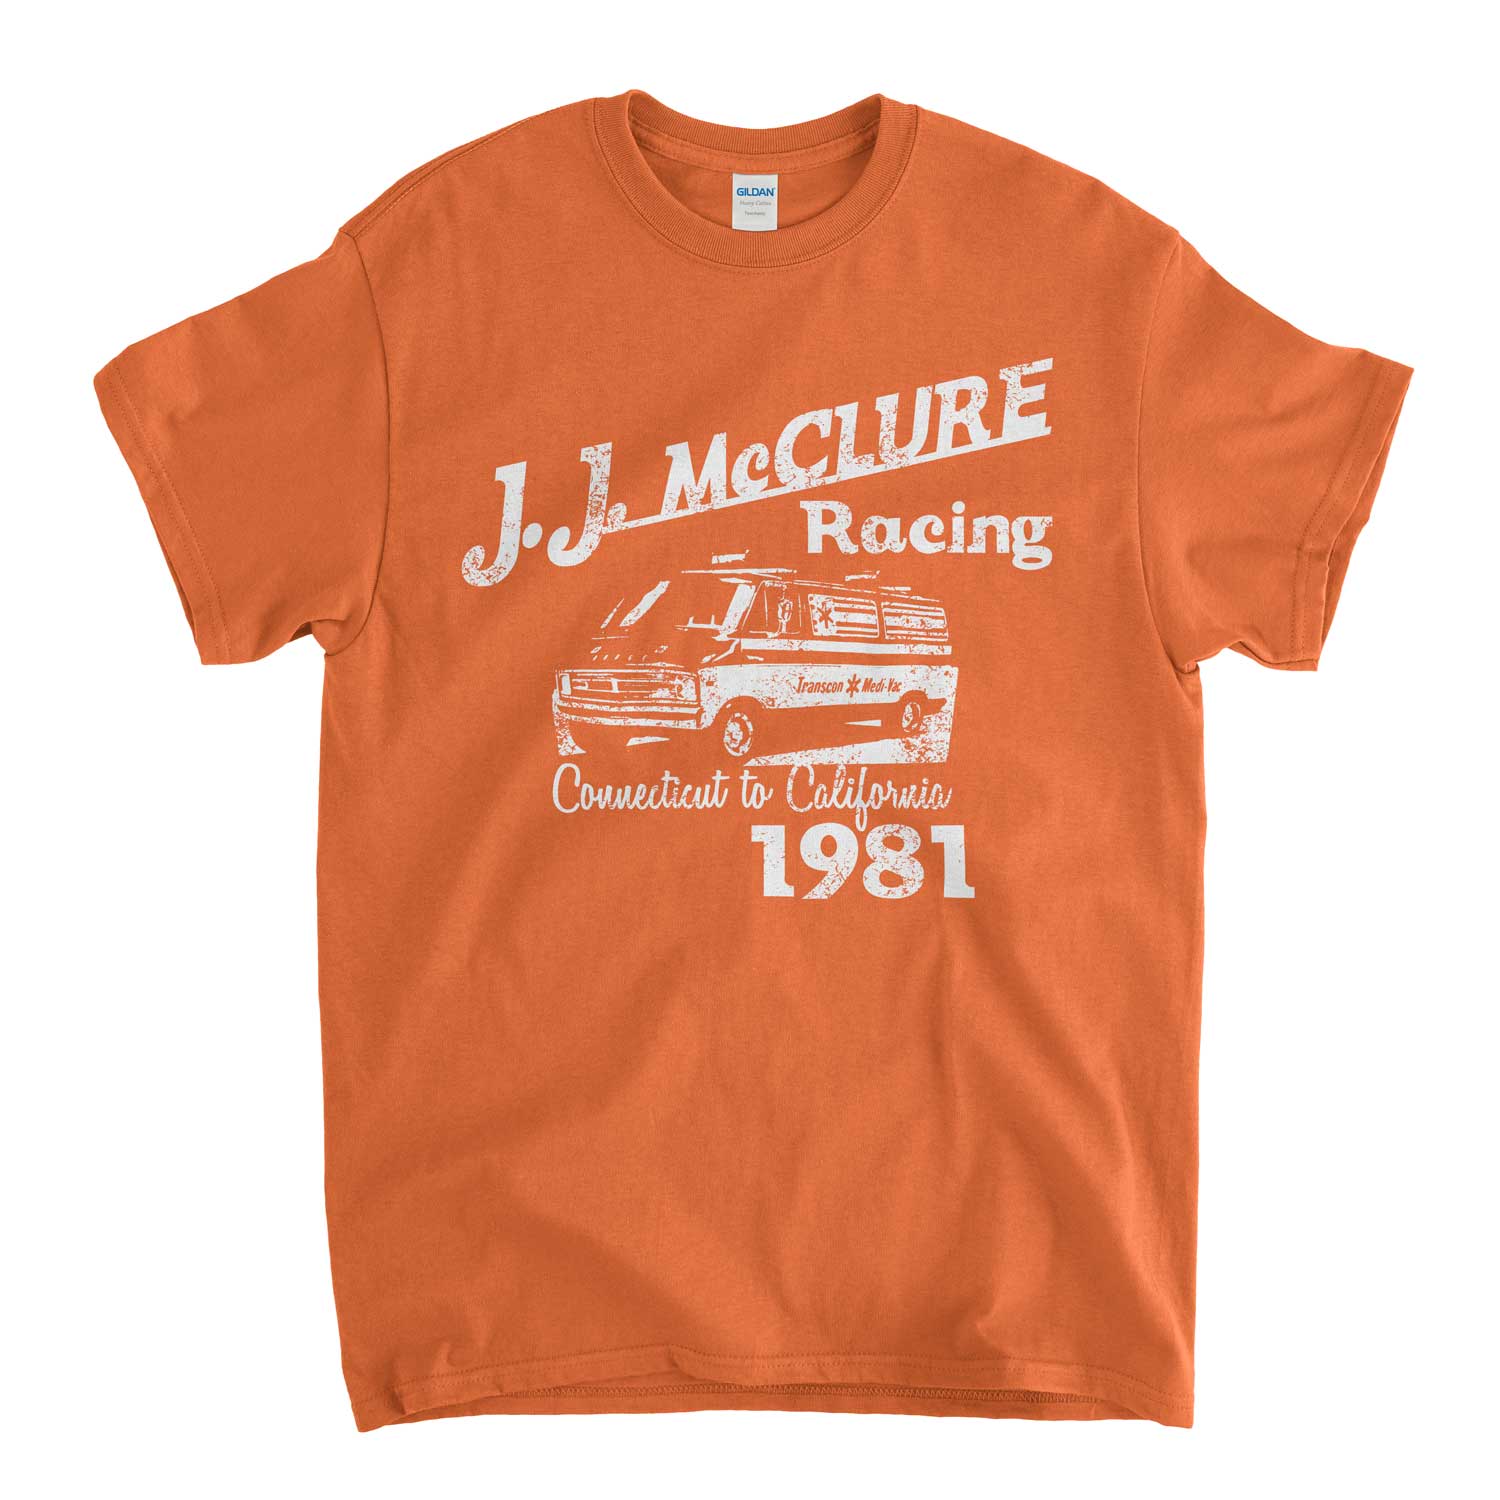 Inspired by The Cannonball Run T Shirt - J.J. McClure Racing